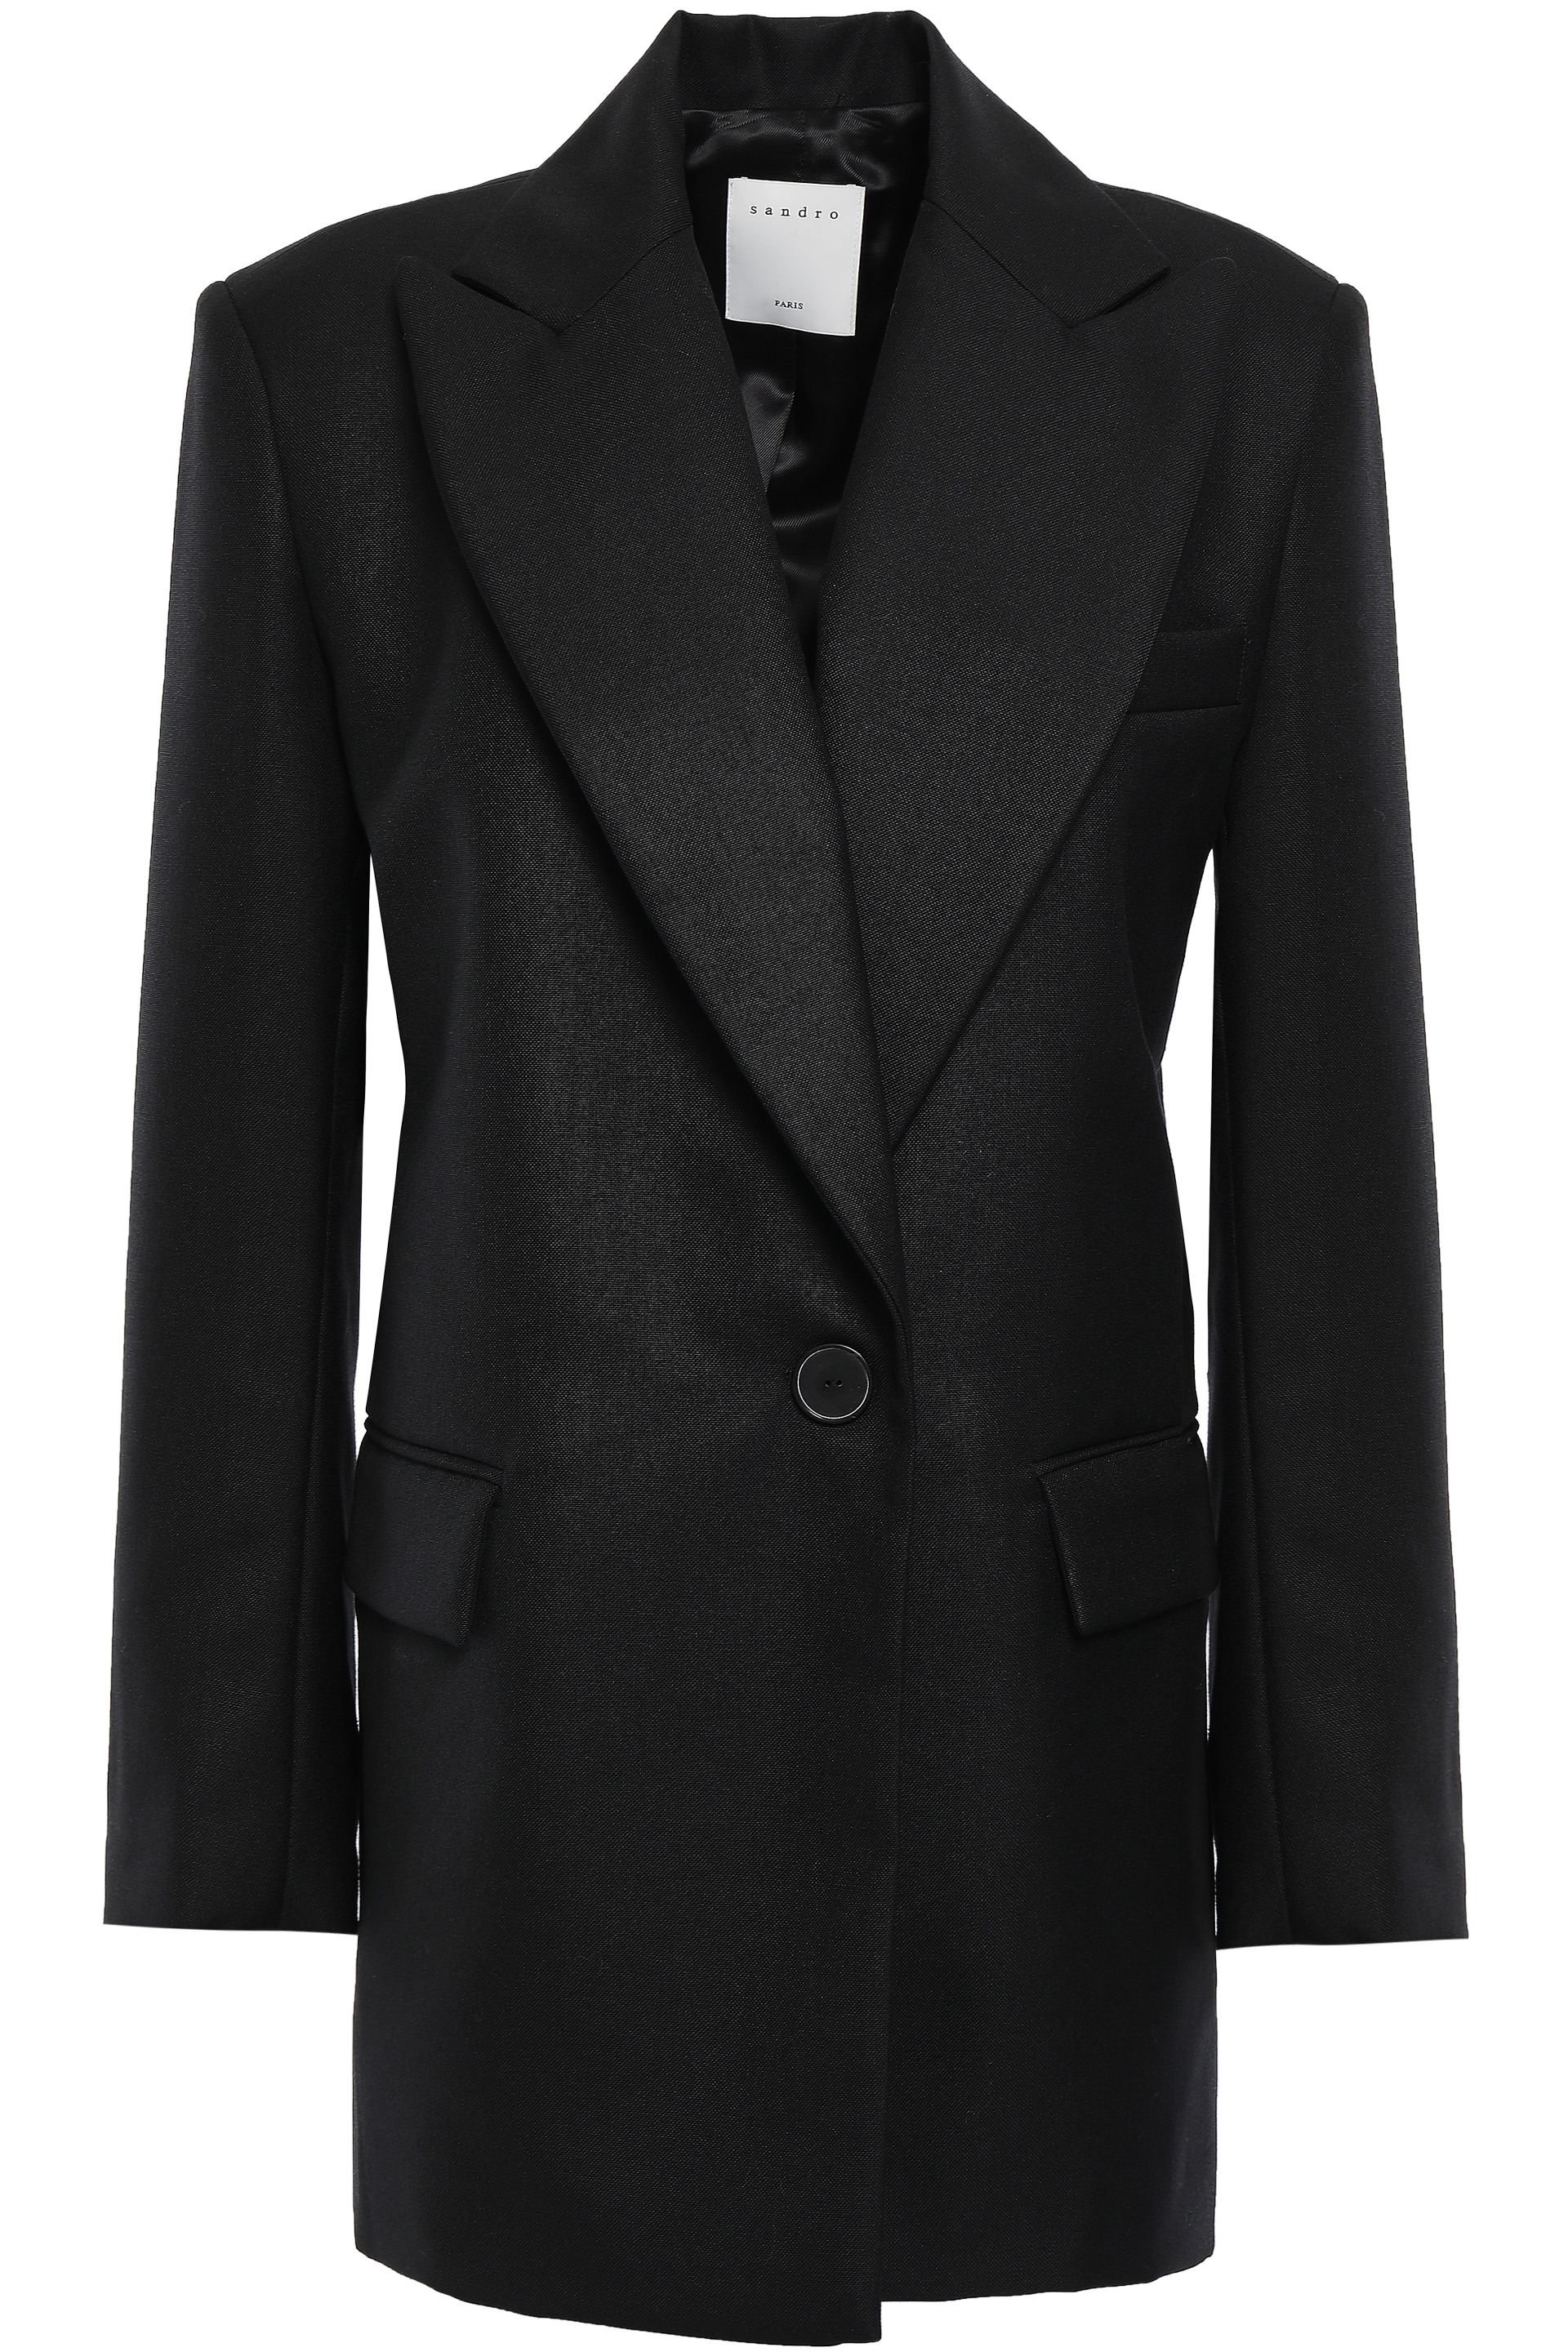 Designer Blazers For Women | Sale Up To 70% Off At THE OUTNET